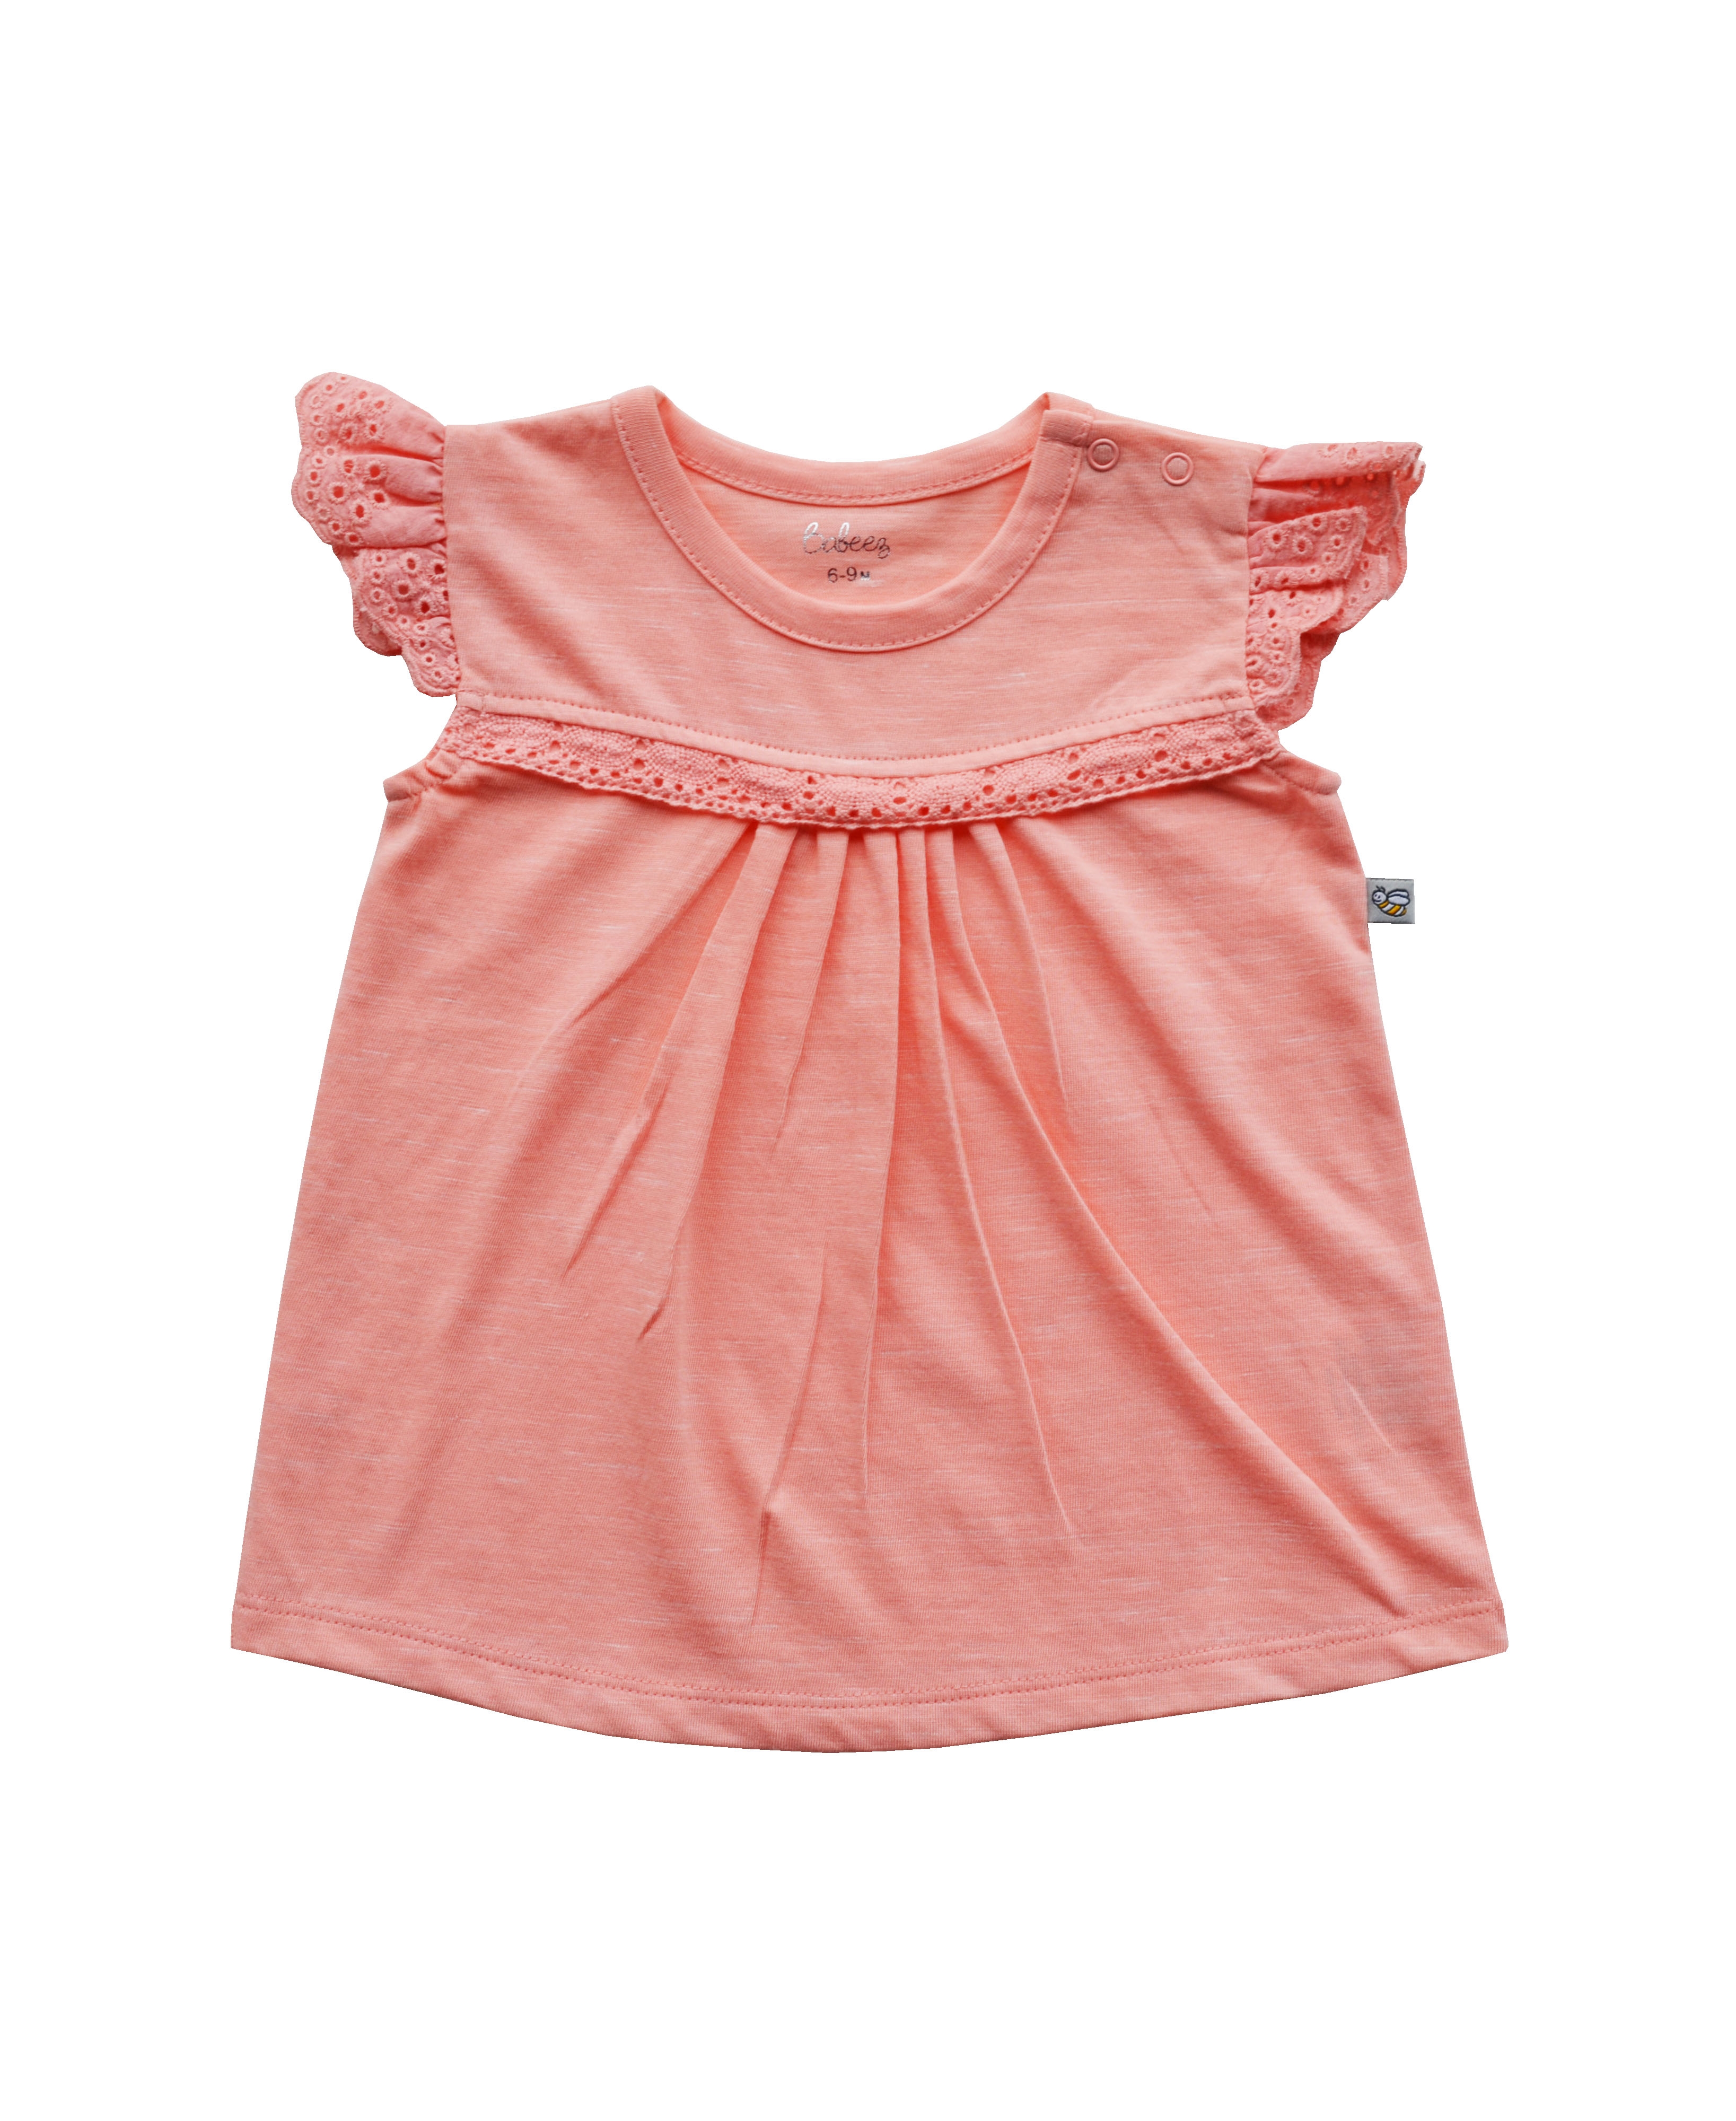 Babeez | Girls Peach Top with Lace (Slub Jersey) undefined